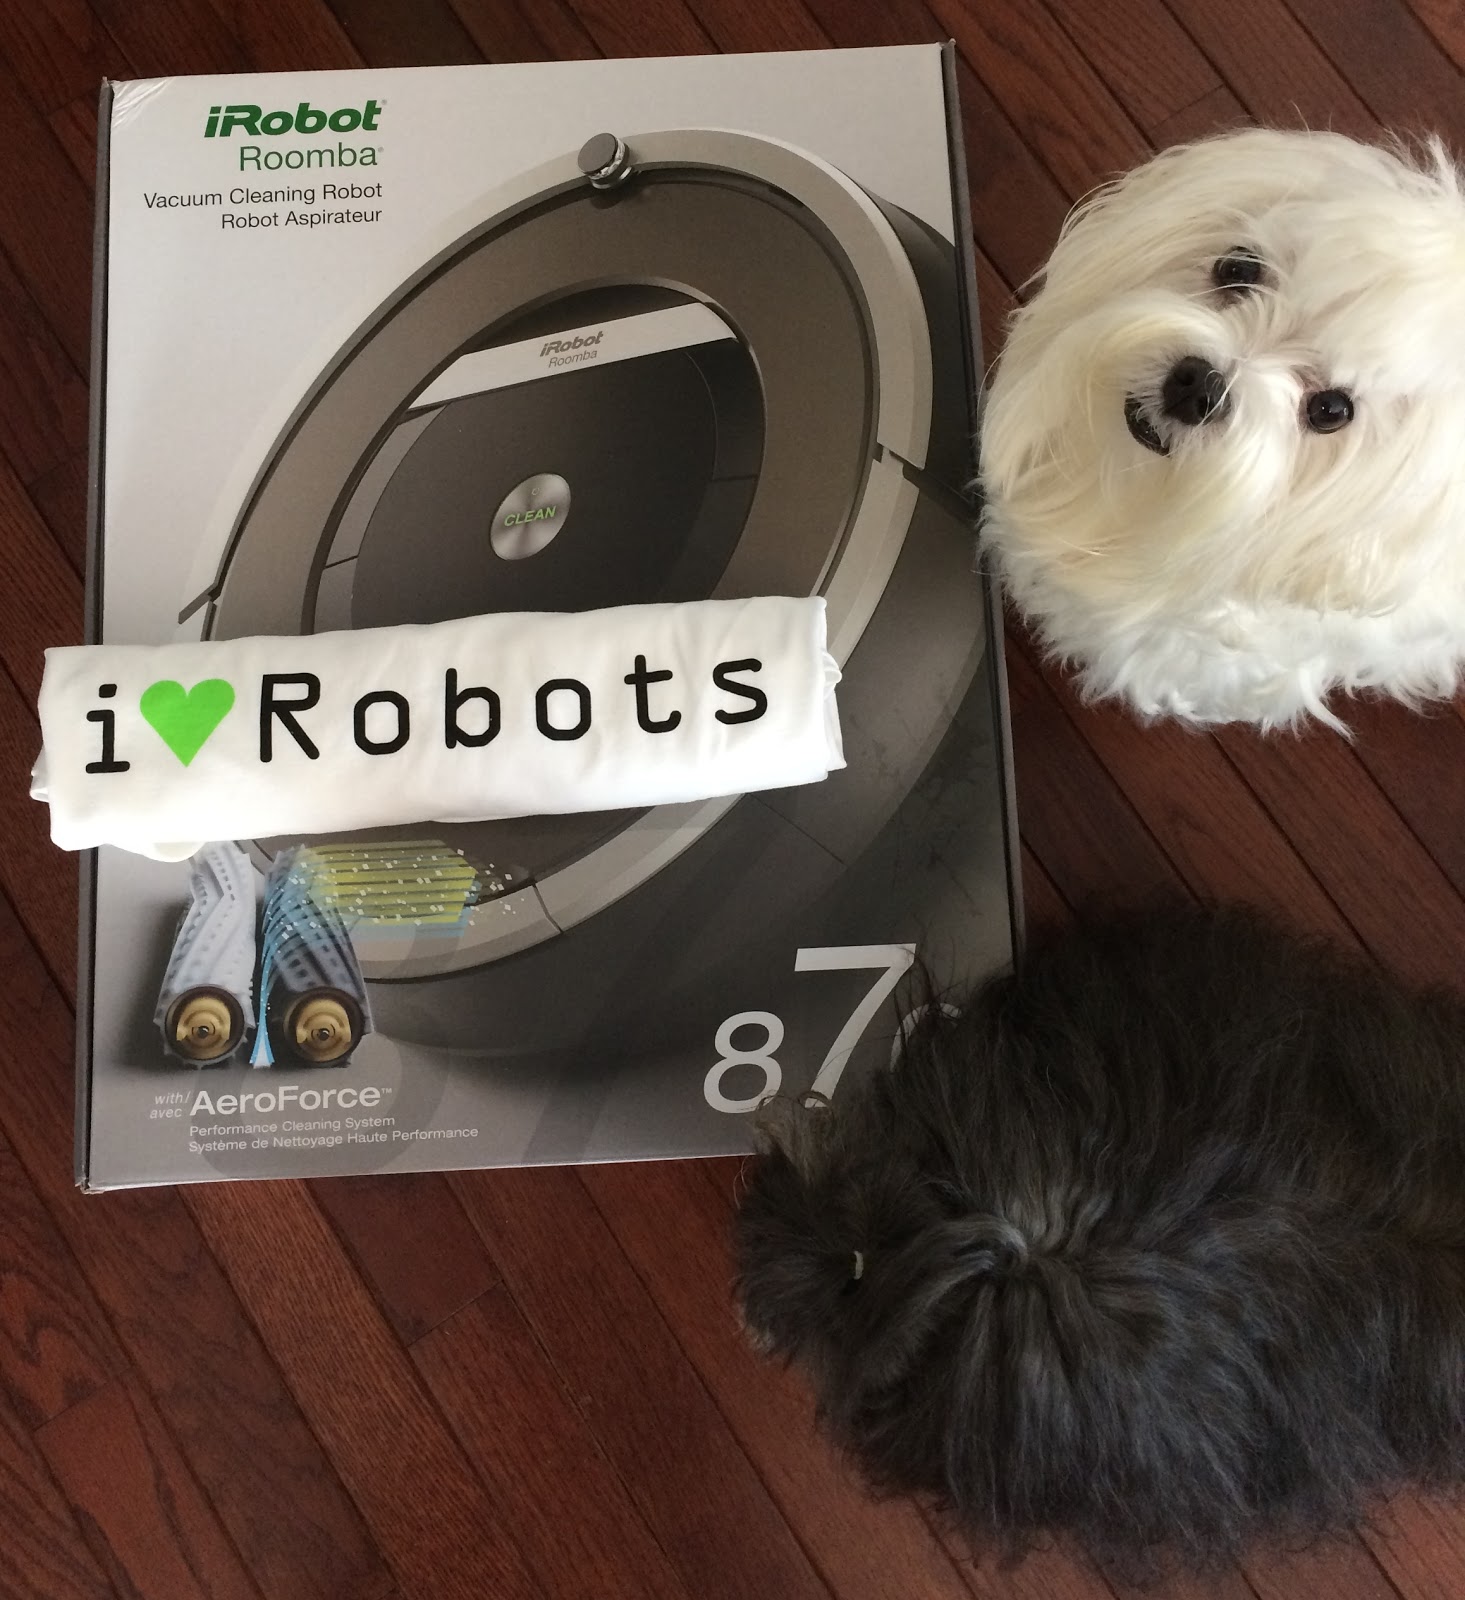 Blue Skies for Me Please: iRobot Roomba 870 Vacuum Cleaning Robot Review